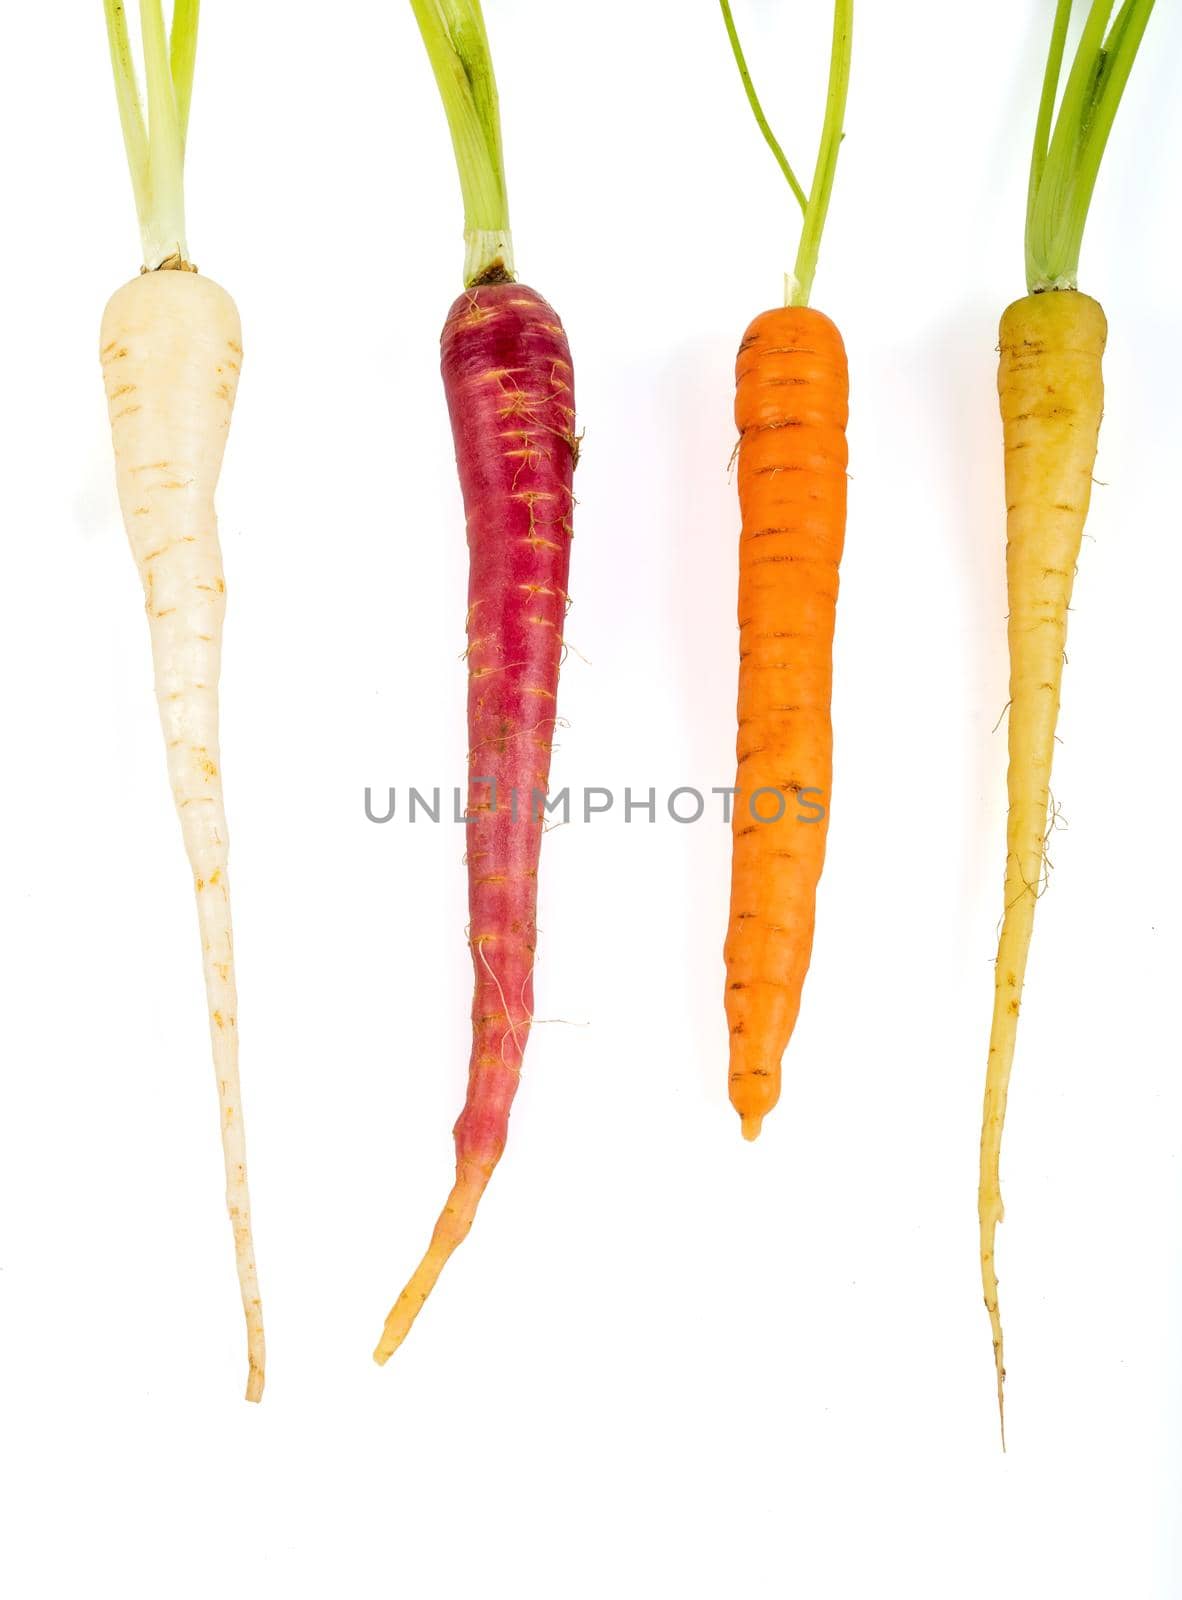 Bunch of fresh baby carrots isolated on white background